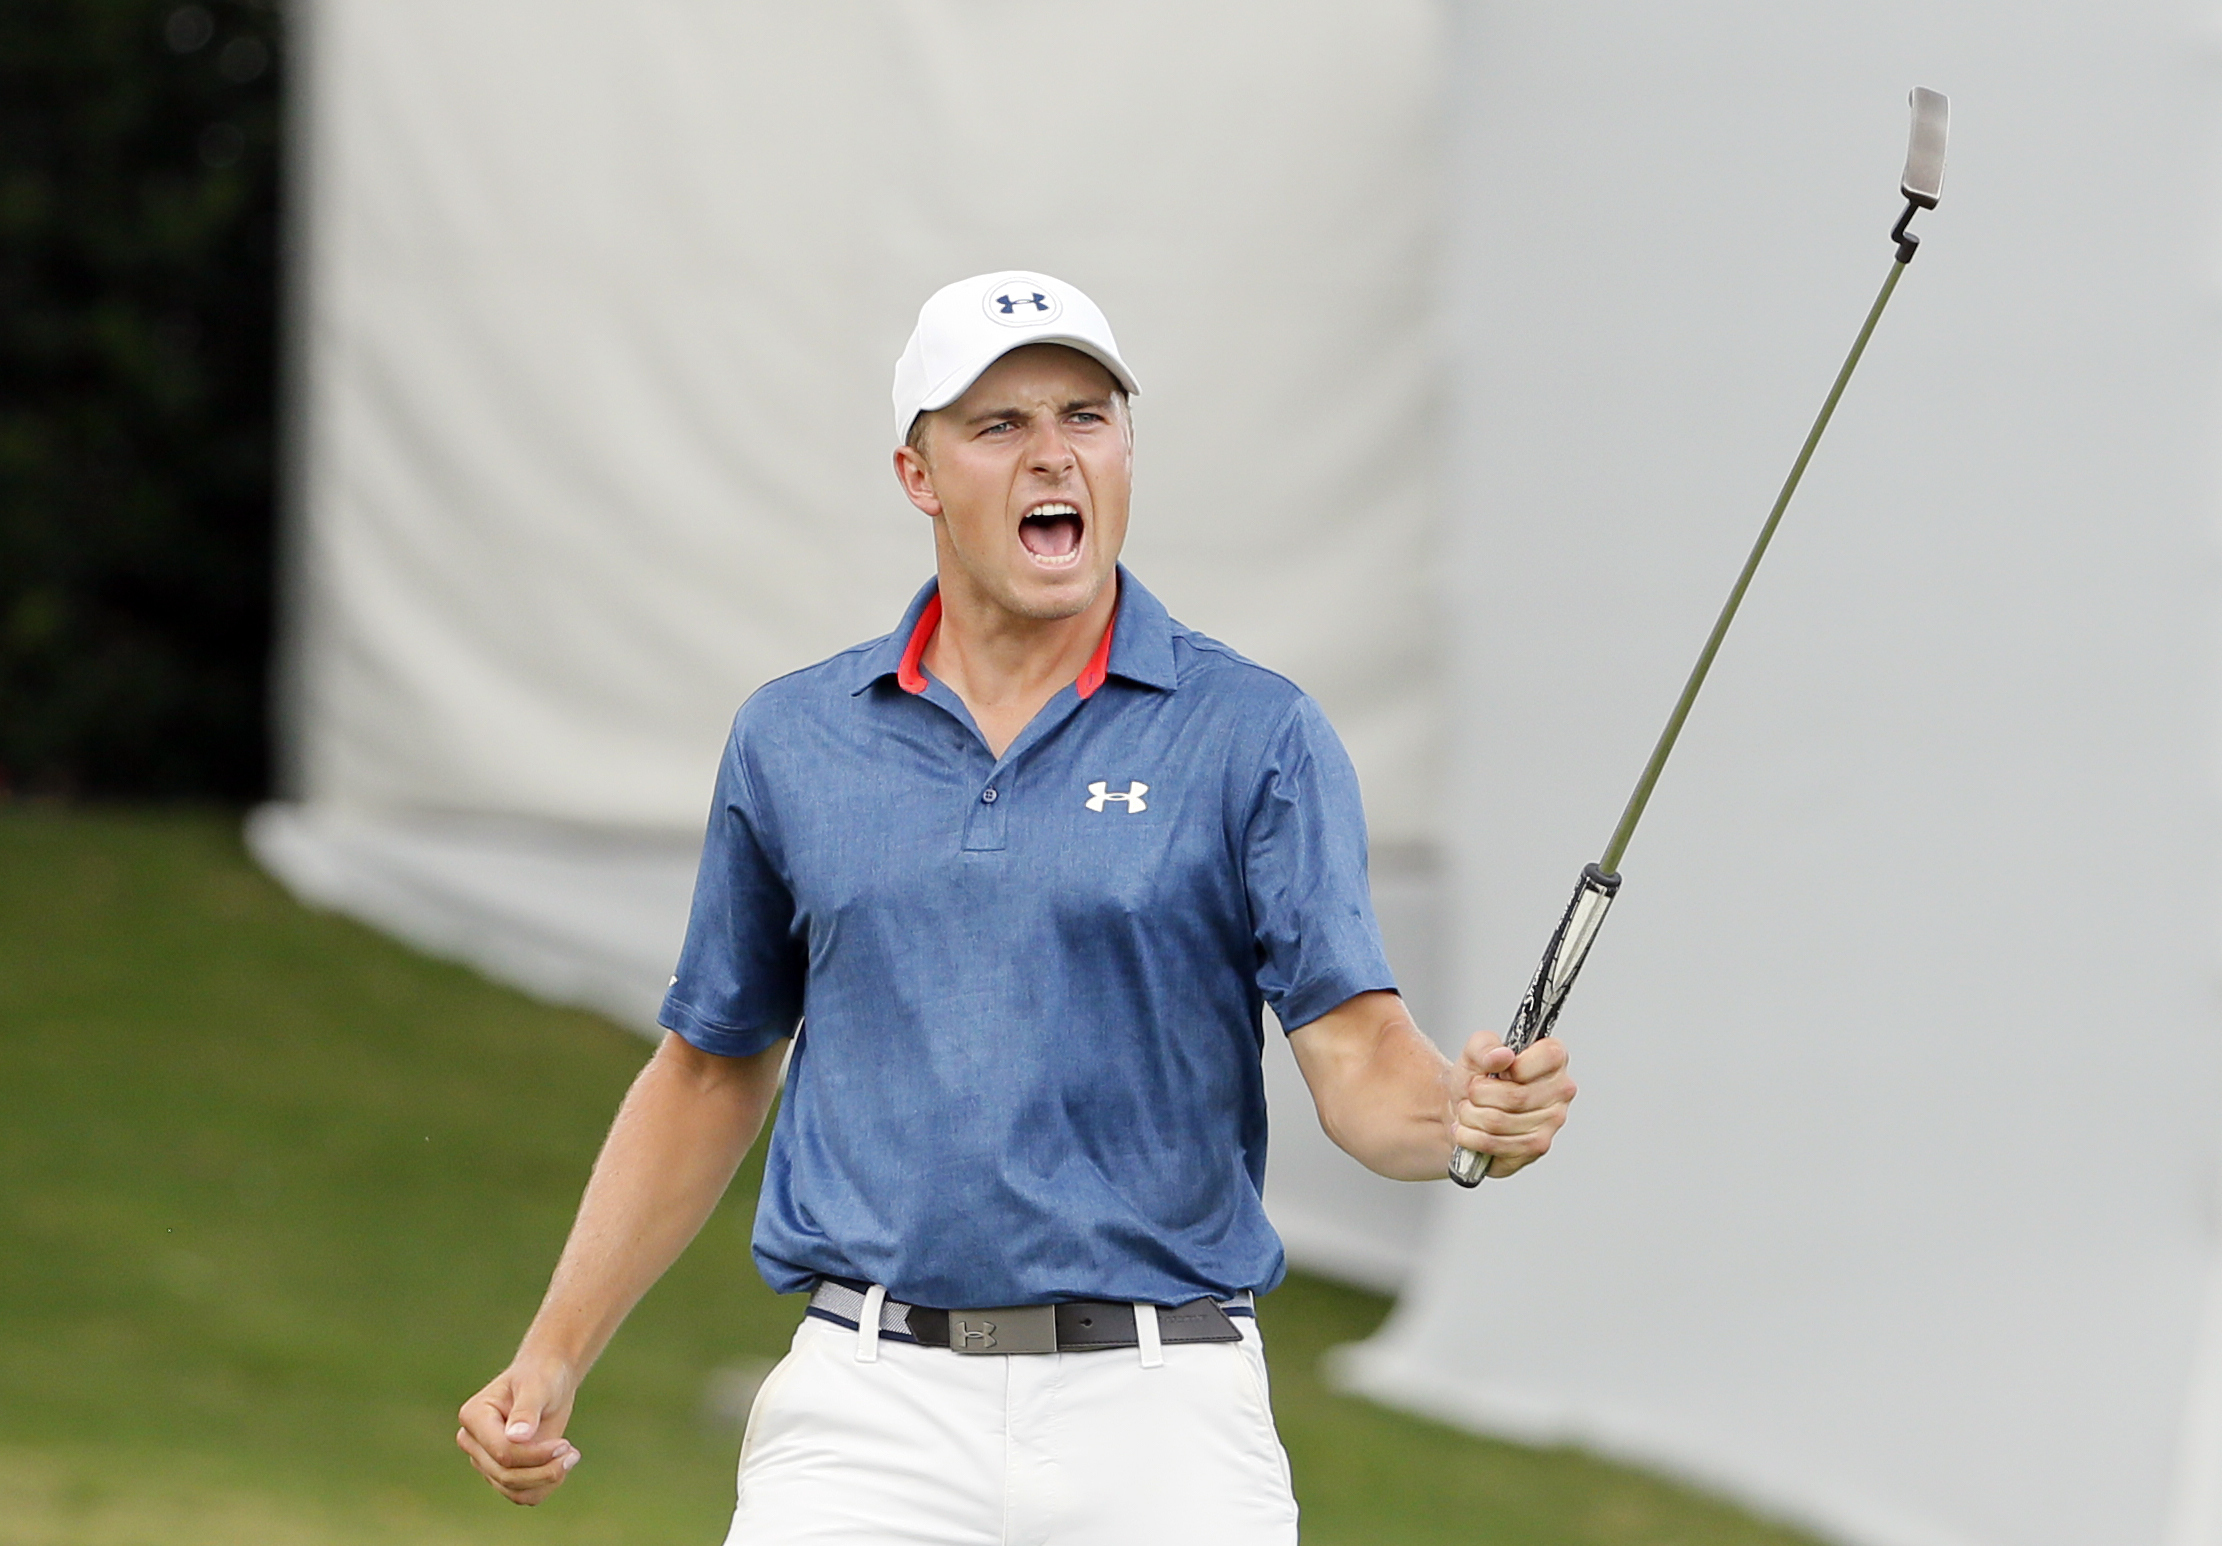 Jordan Spieth Sends The Masters Demons Packing With A Dramatic Performance